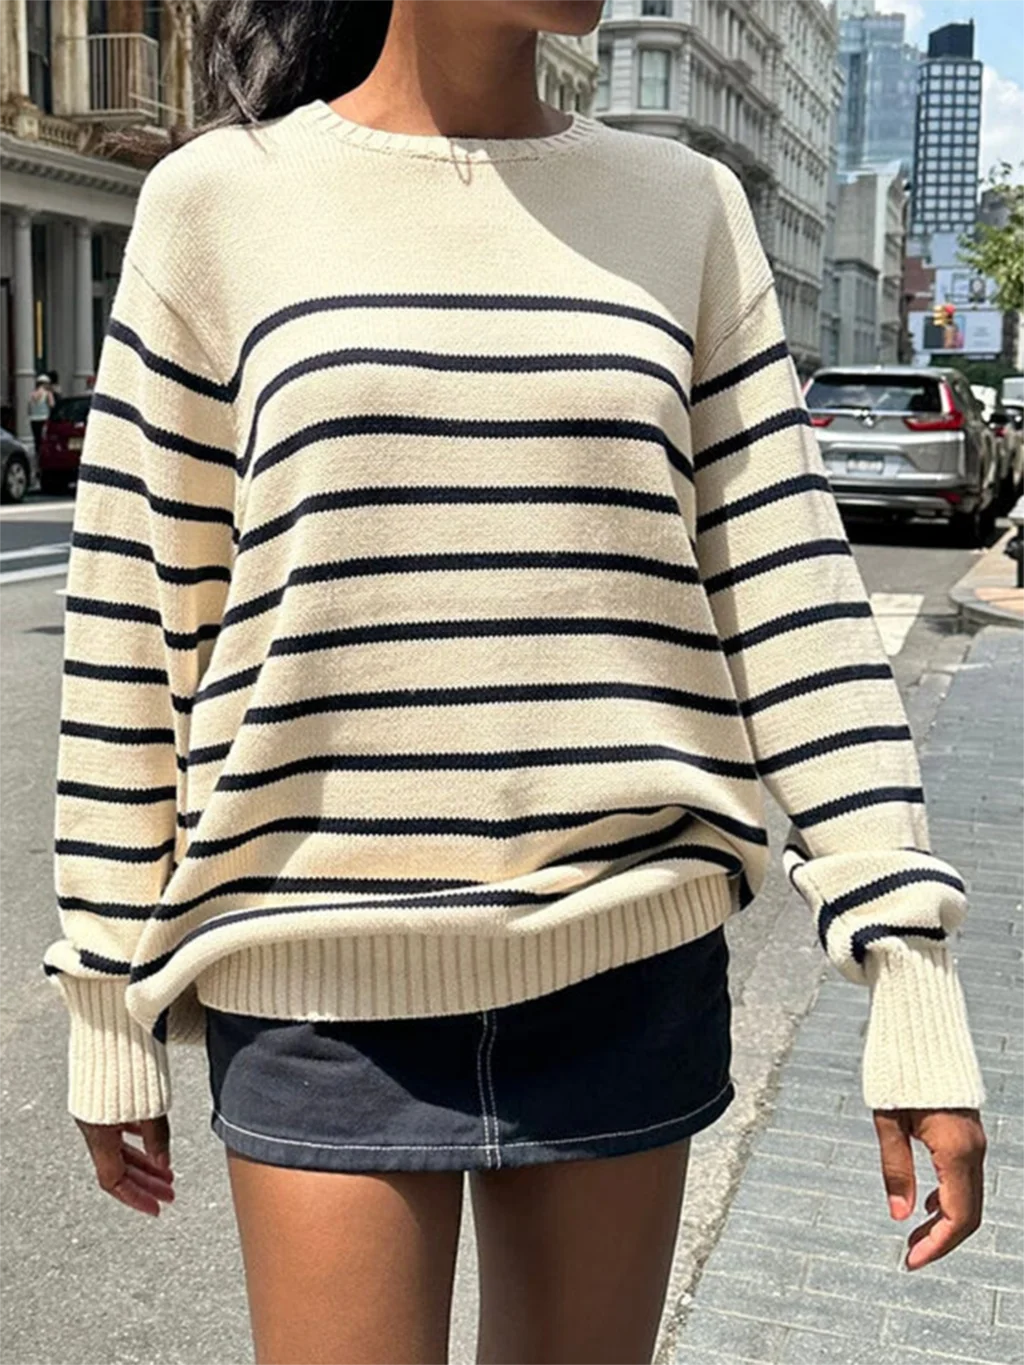 

Classic Stripes Loose Woman Sweaters Autumn Round Neck Long Sleeve Cotton Sweater Pullover Streetwear Preppy Style Y2k Jumpers